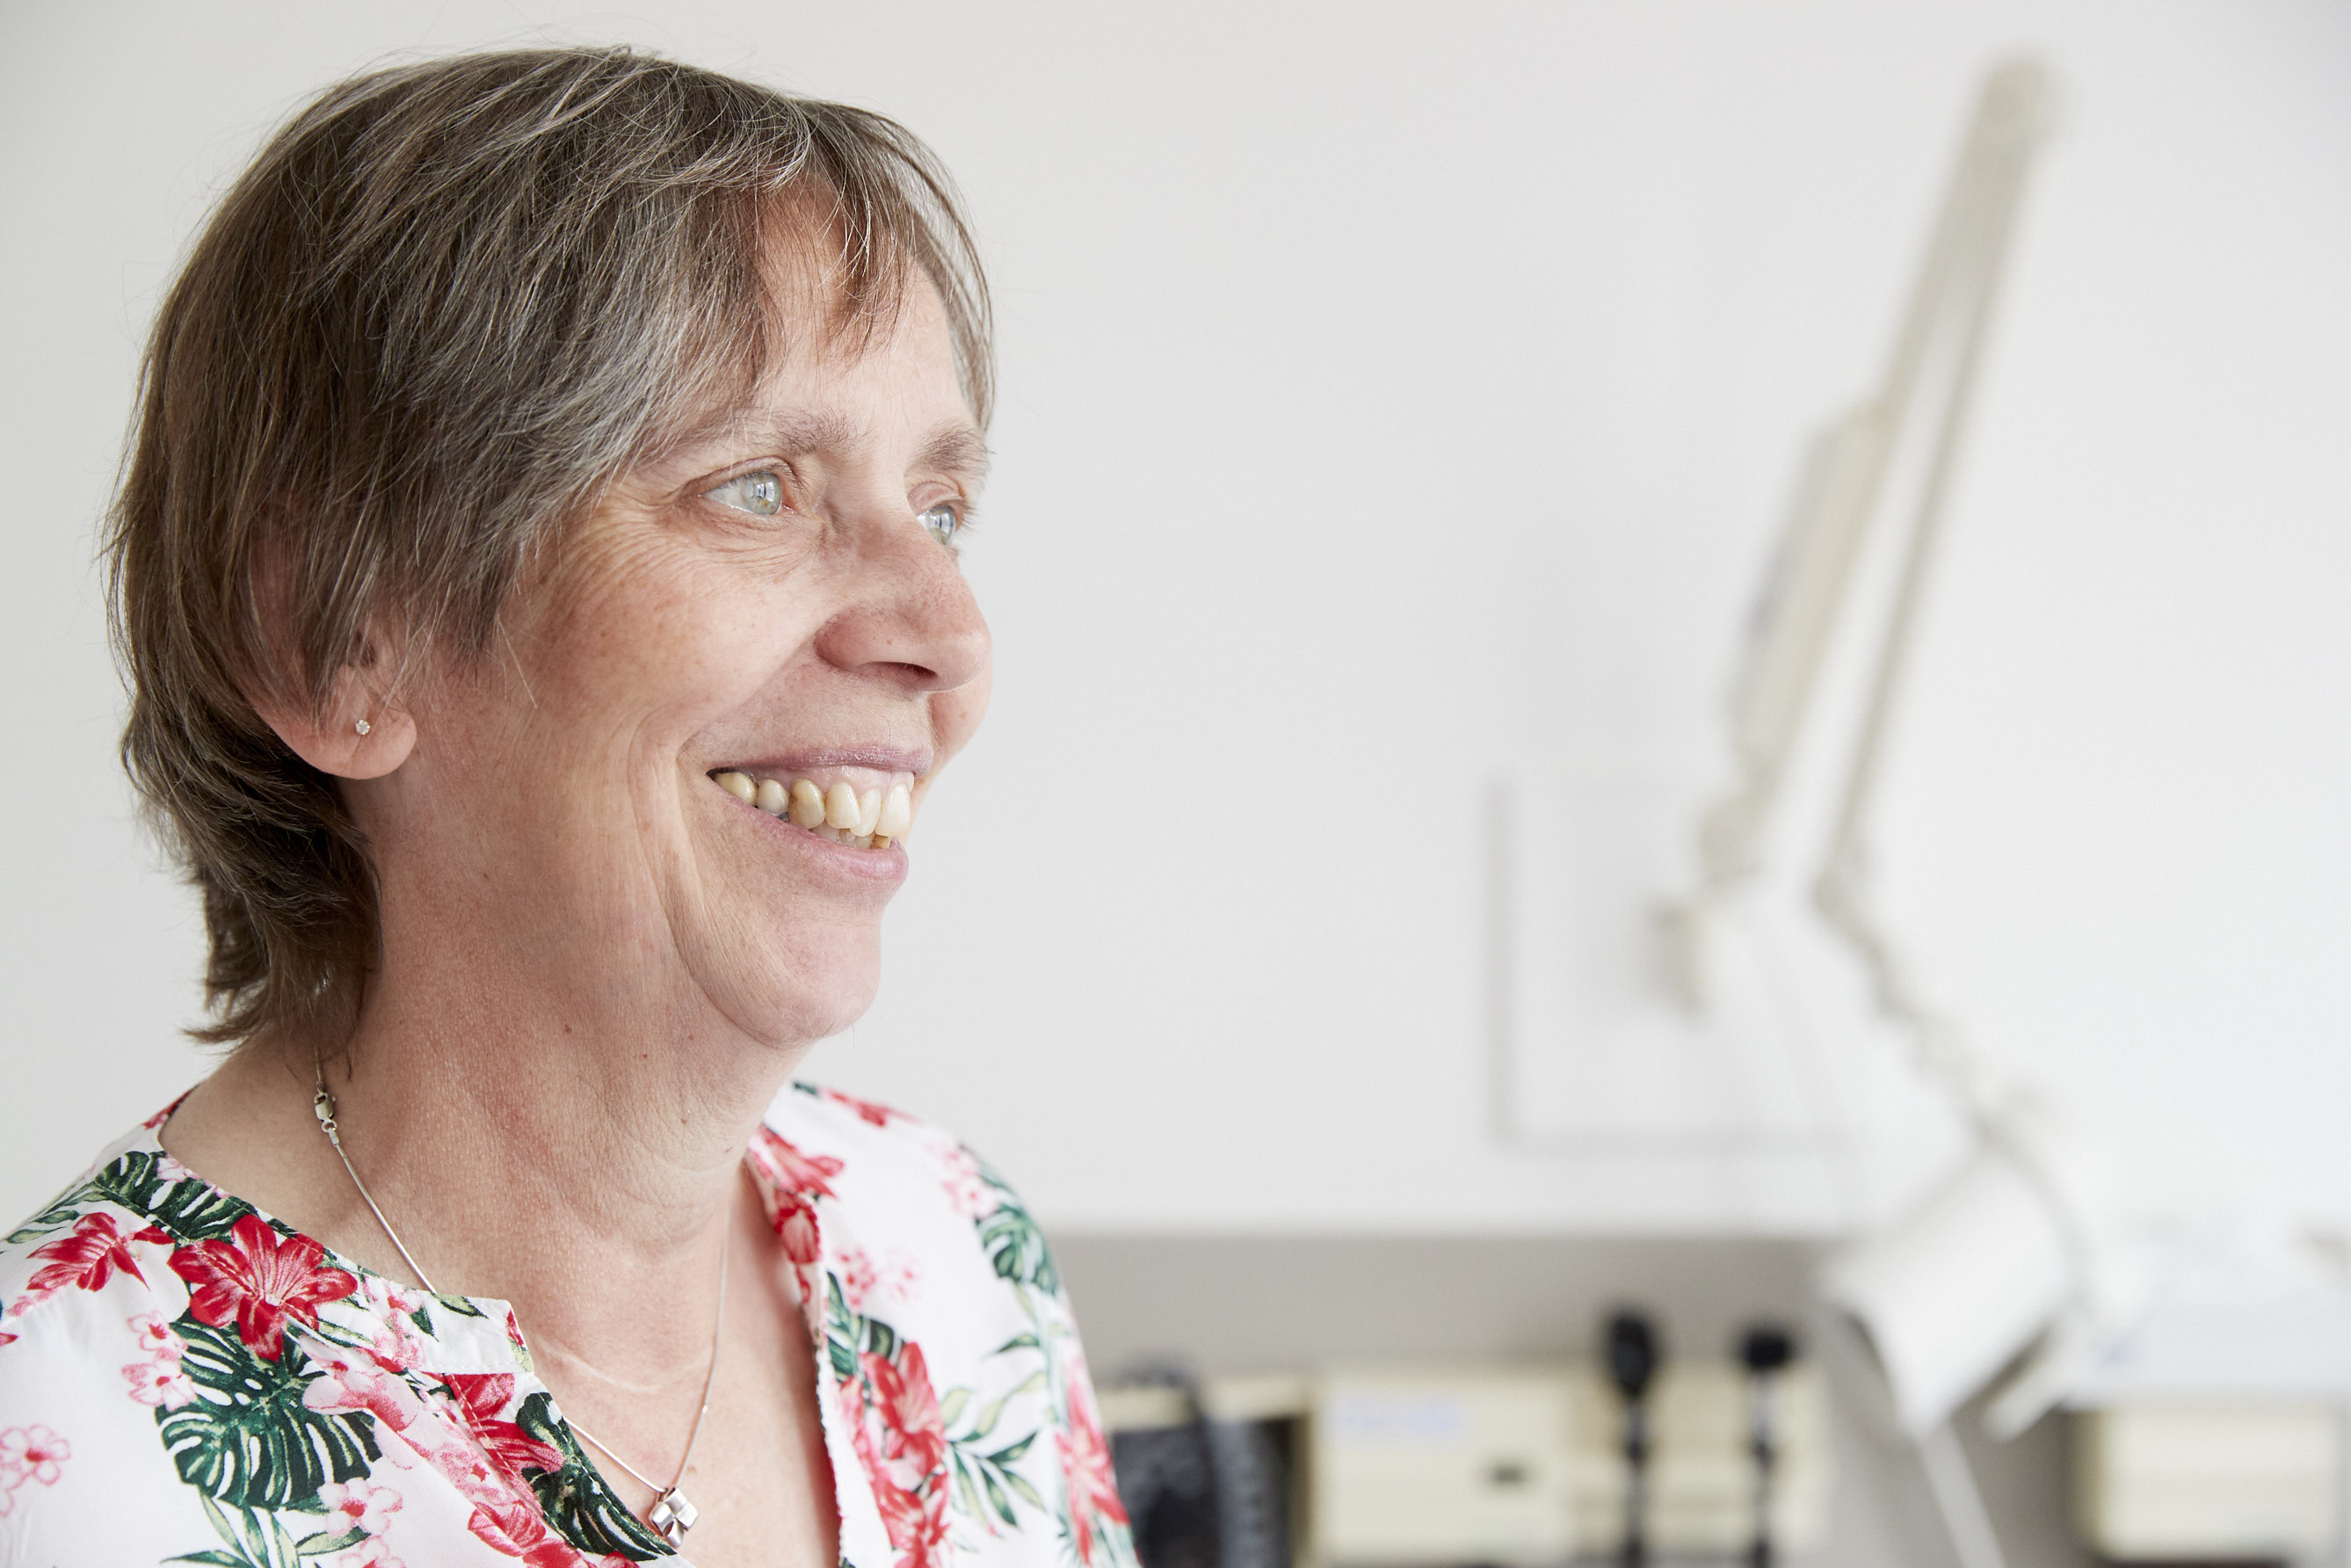 Hilary Stobart took part in the IMPORT Low breast radiotherapy trial